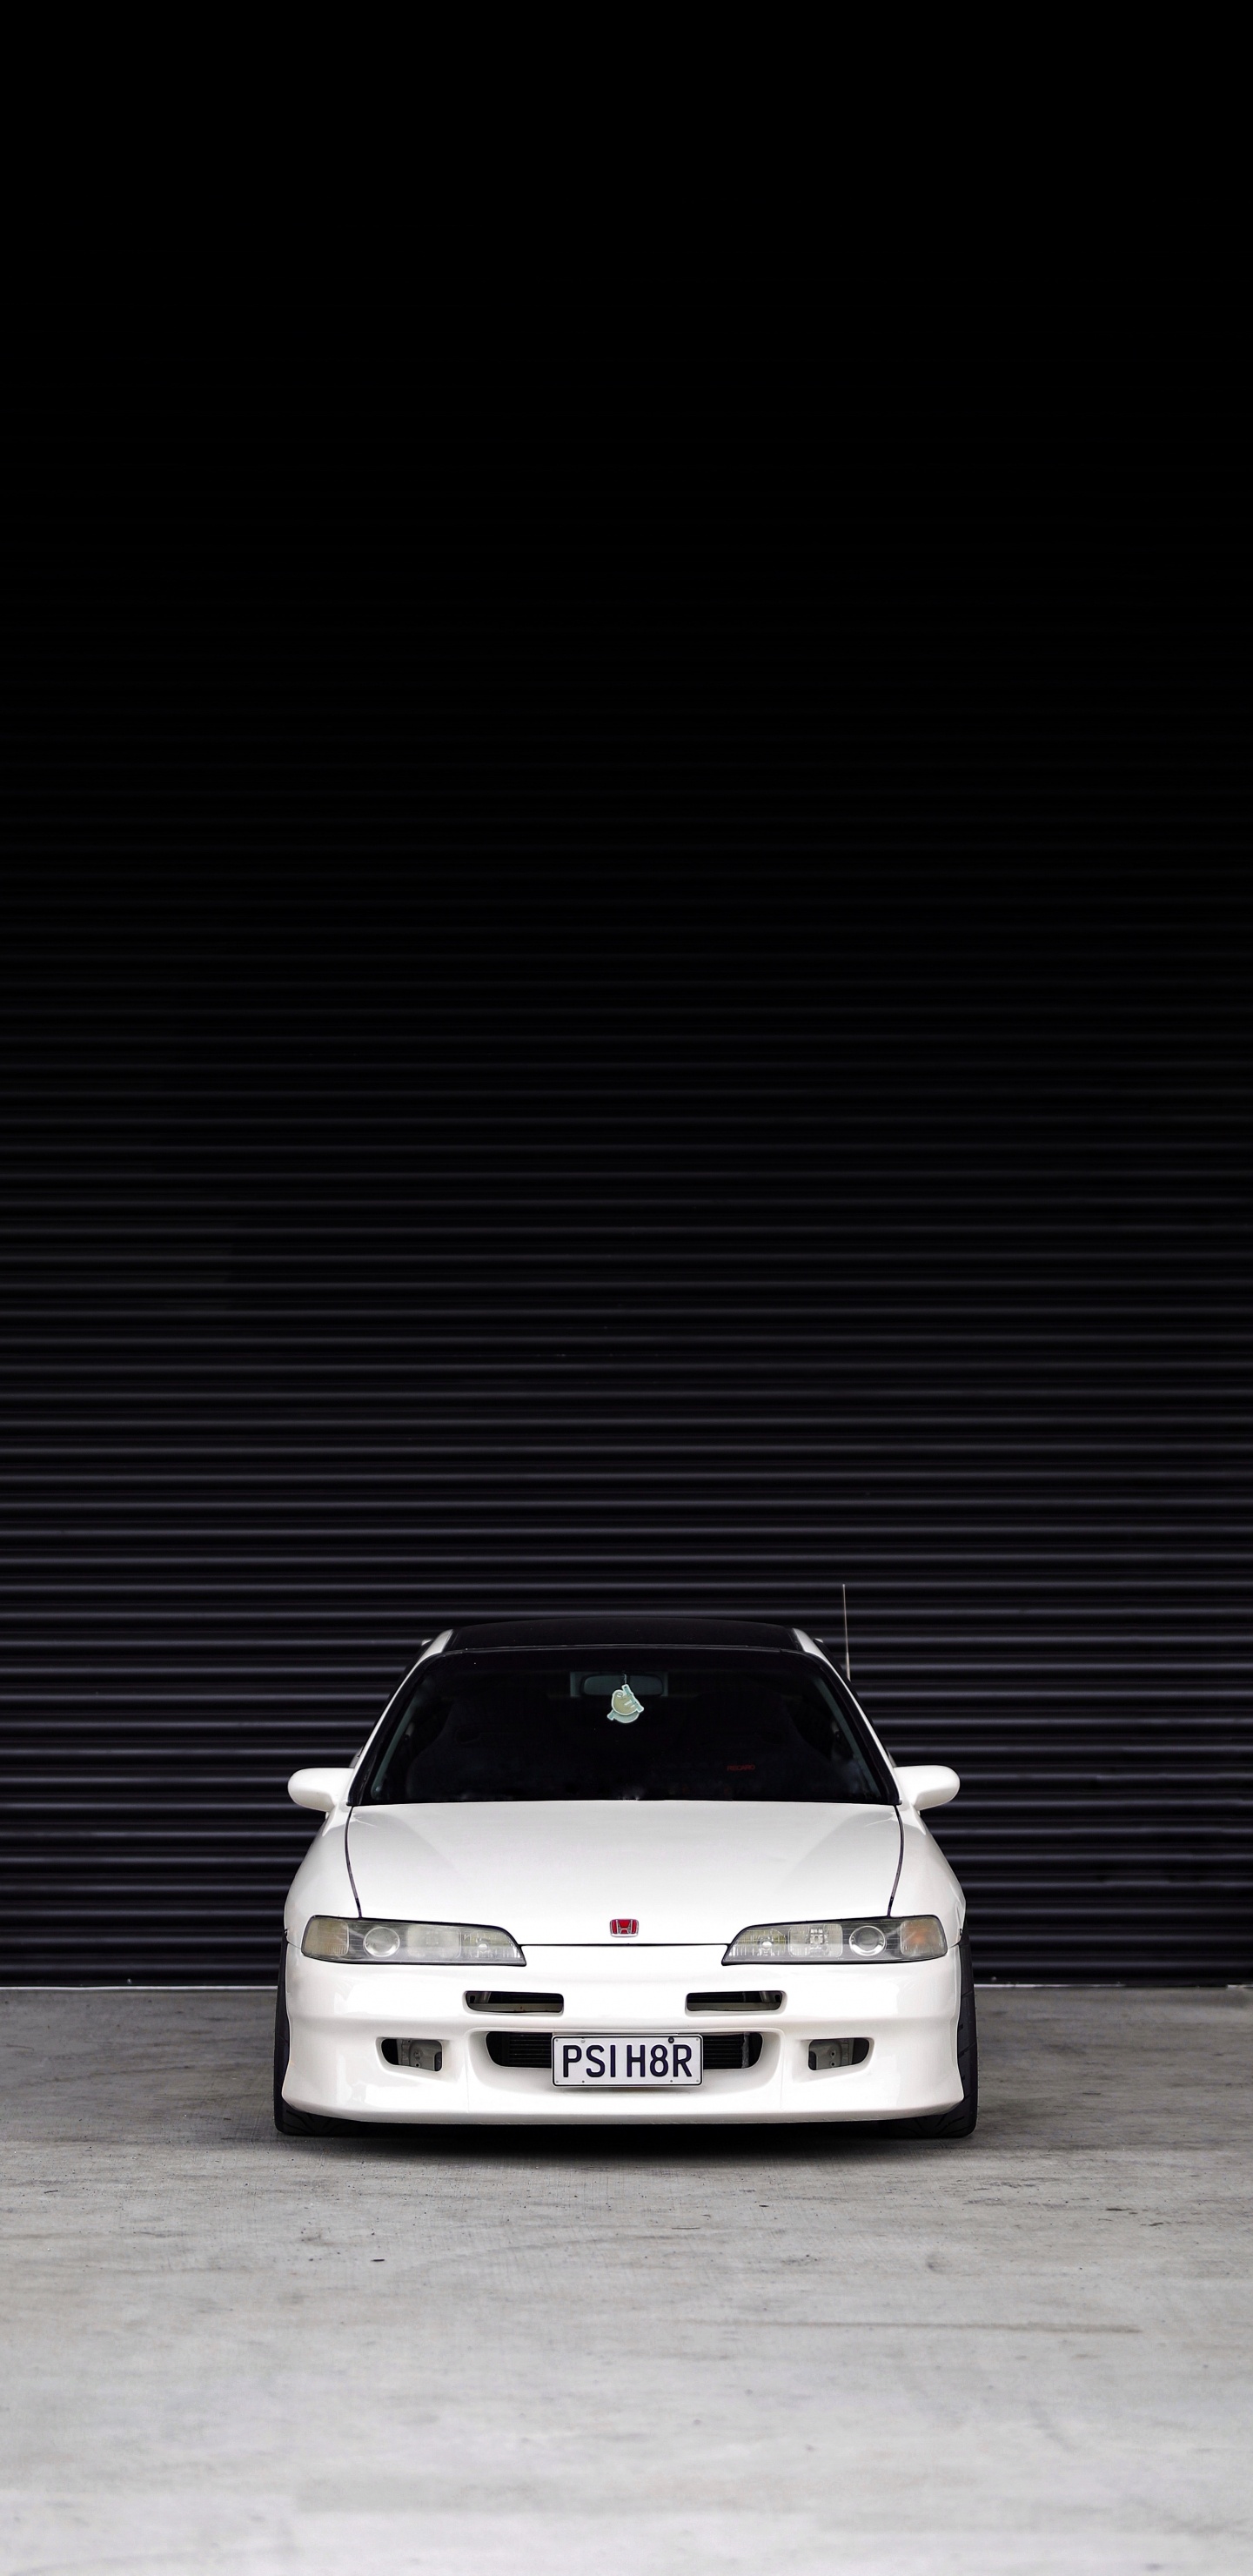 White Car in a White Room. Wallpaper in 1440x2960 Resolution